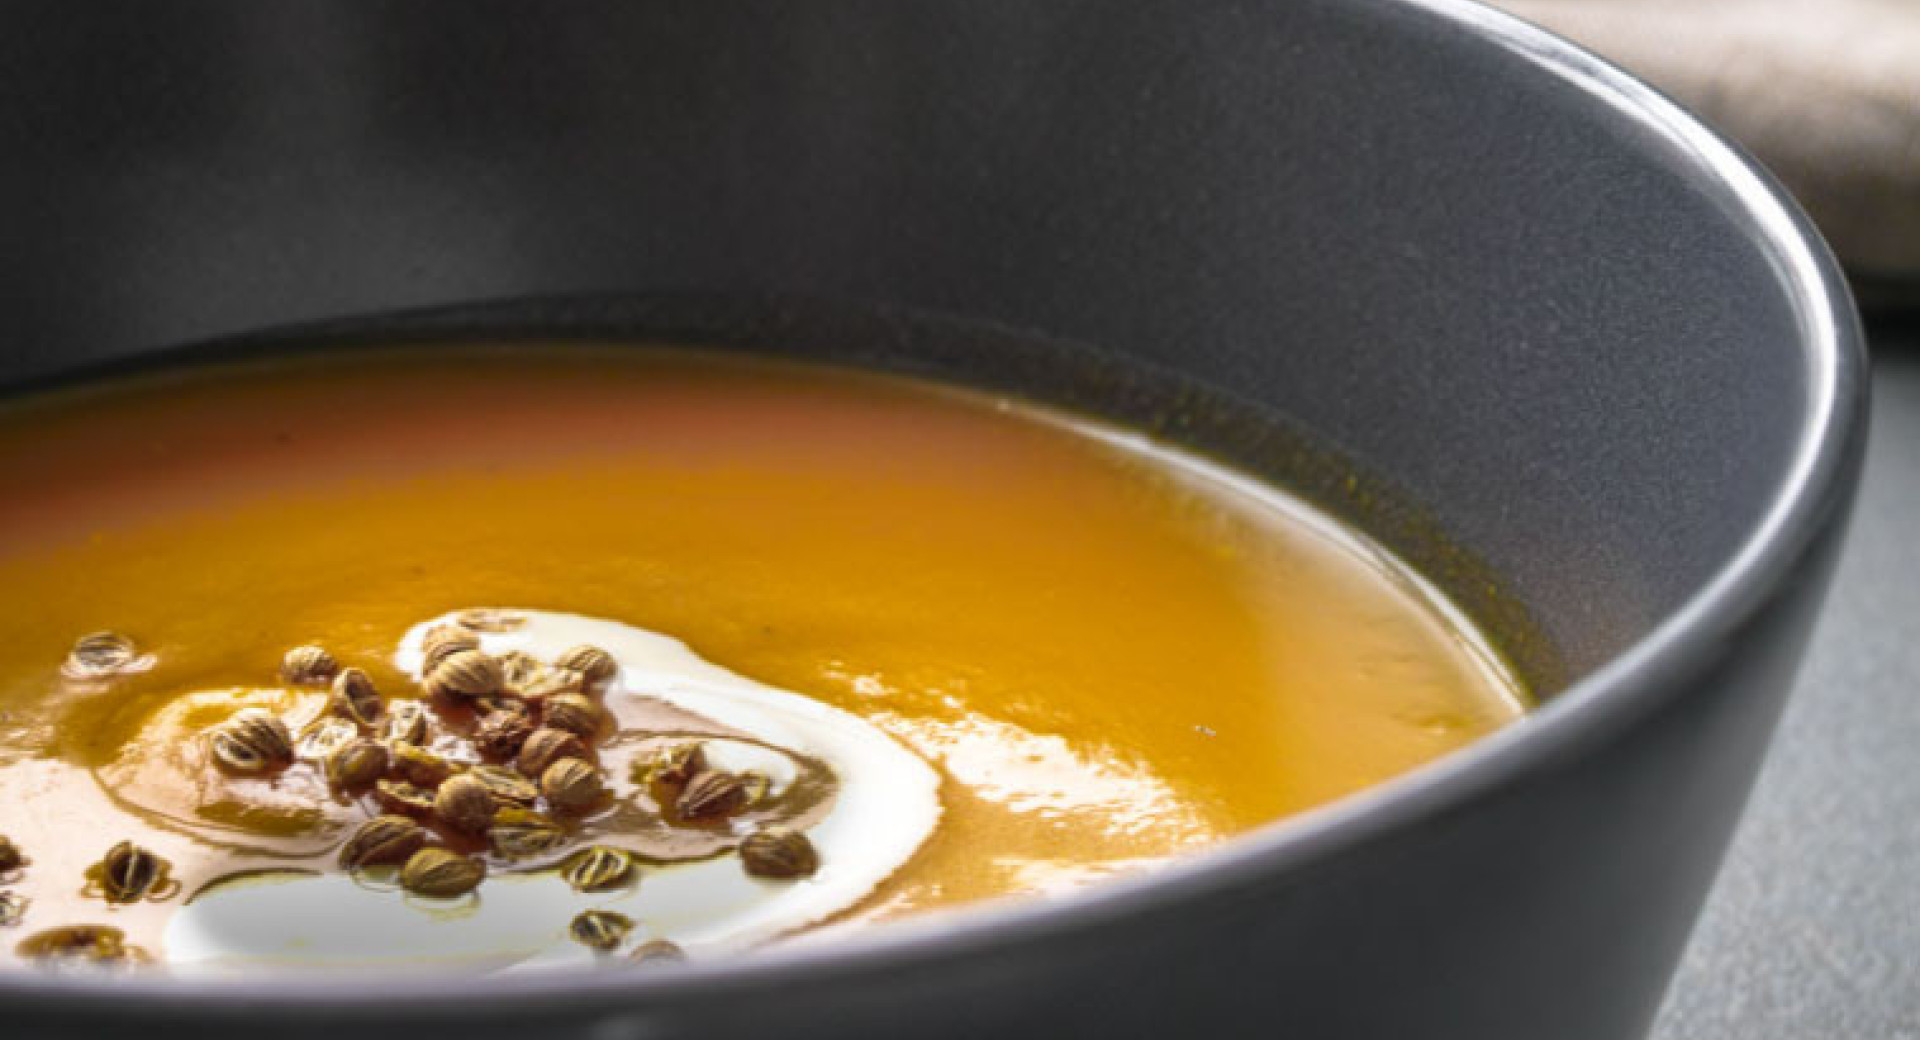 Pumpkin soup in a large black bowl, with a black base. In the orange soup, there's a white swirl of cream, garnished with pumpkin seeds.